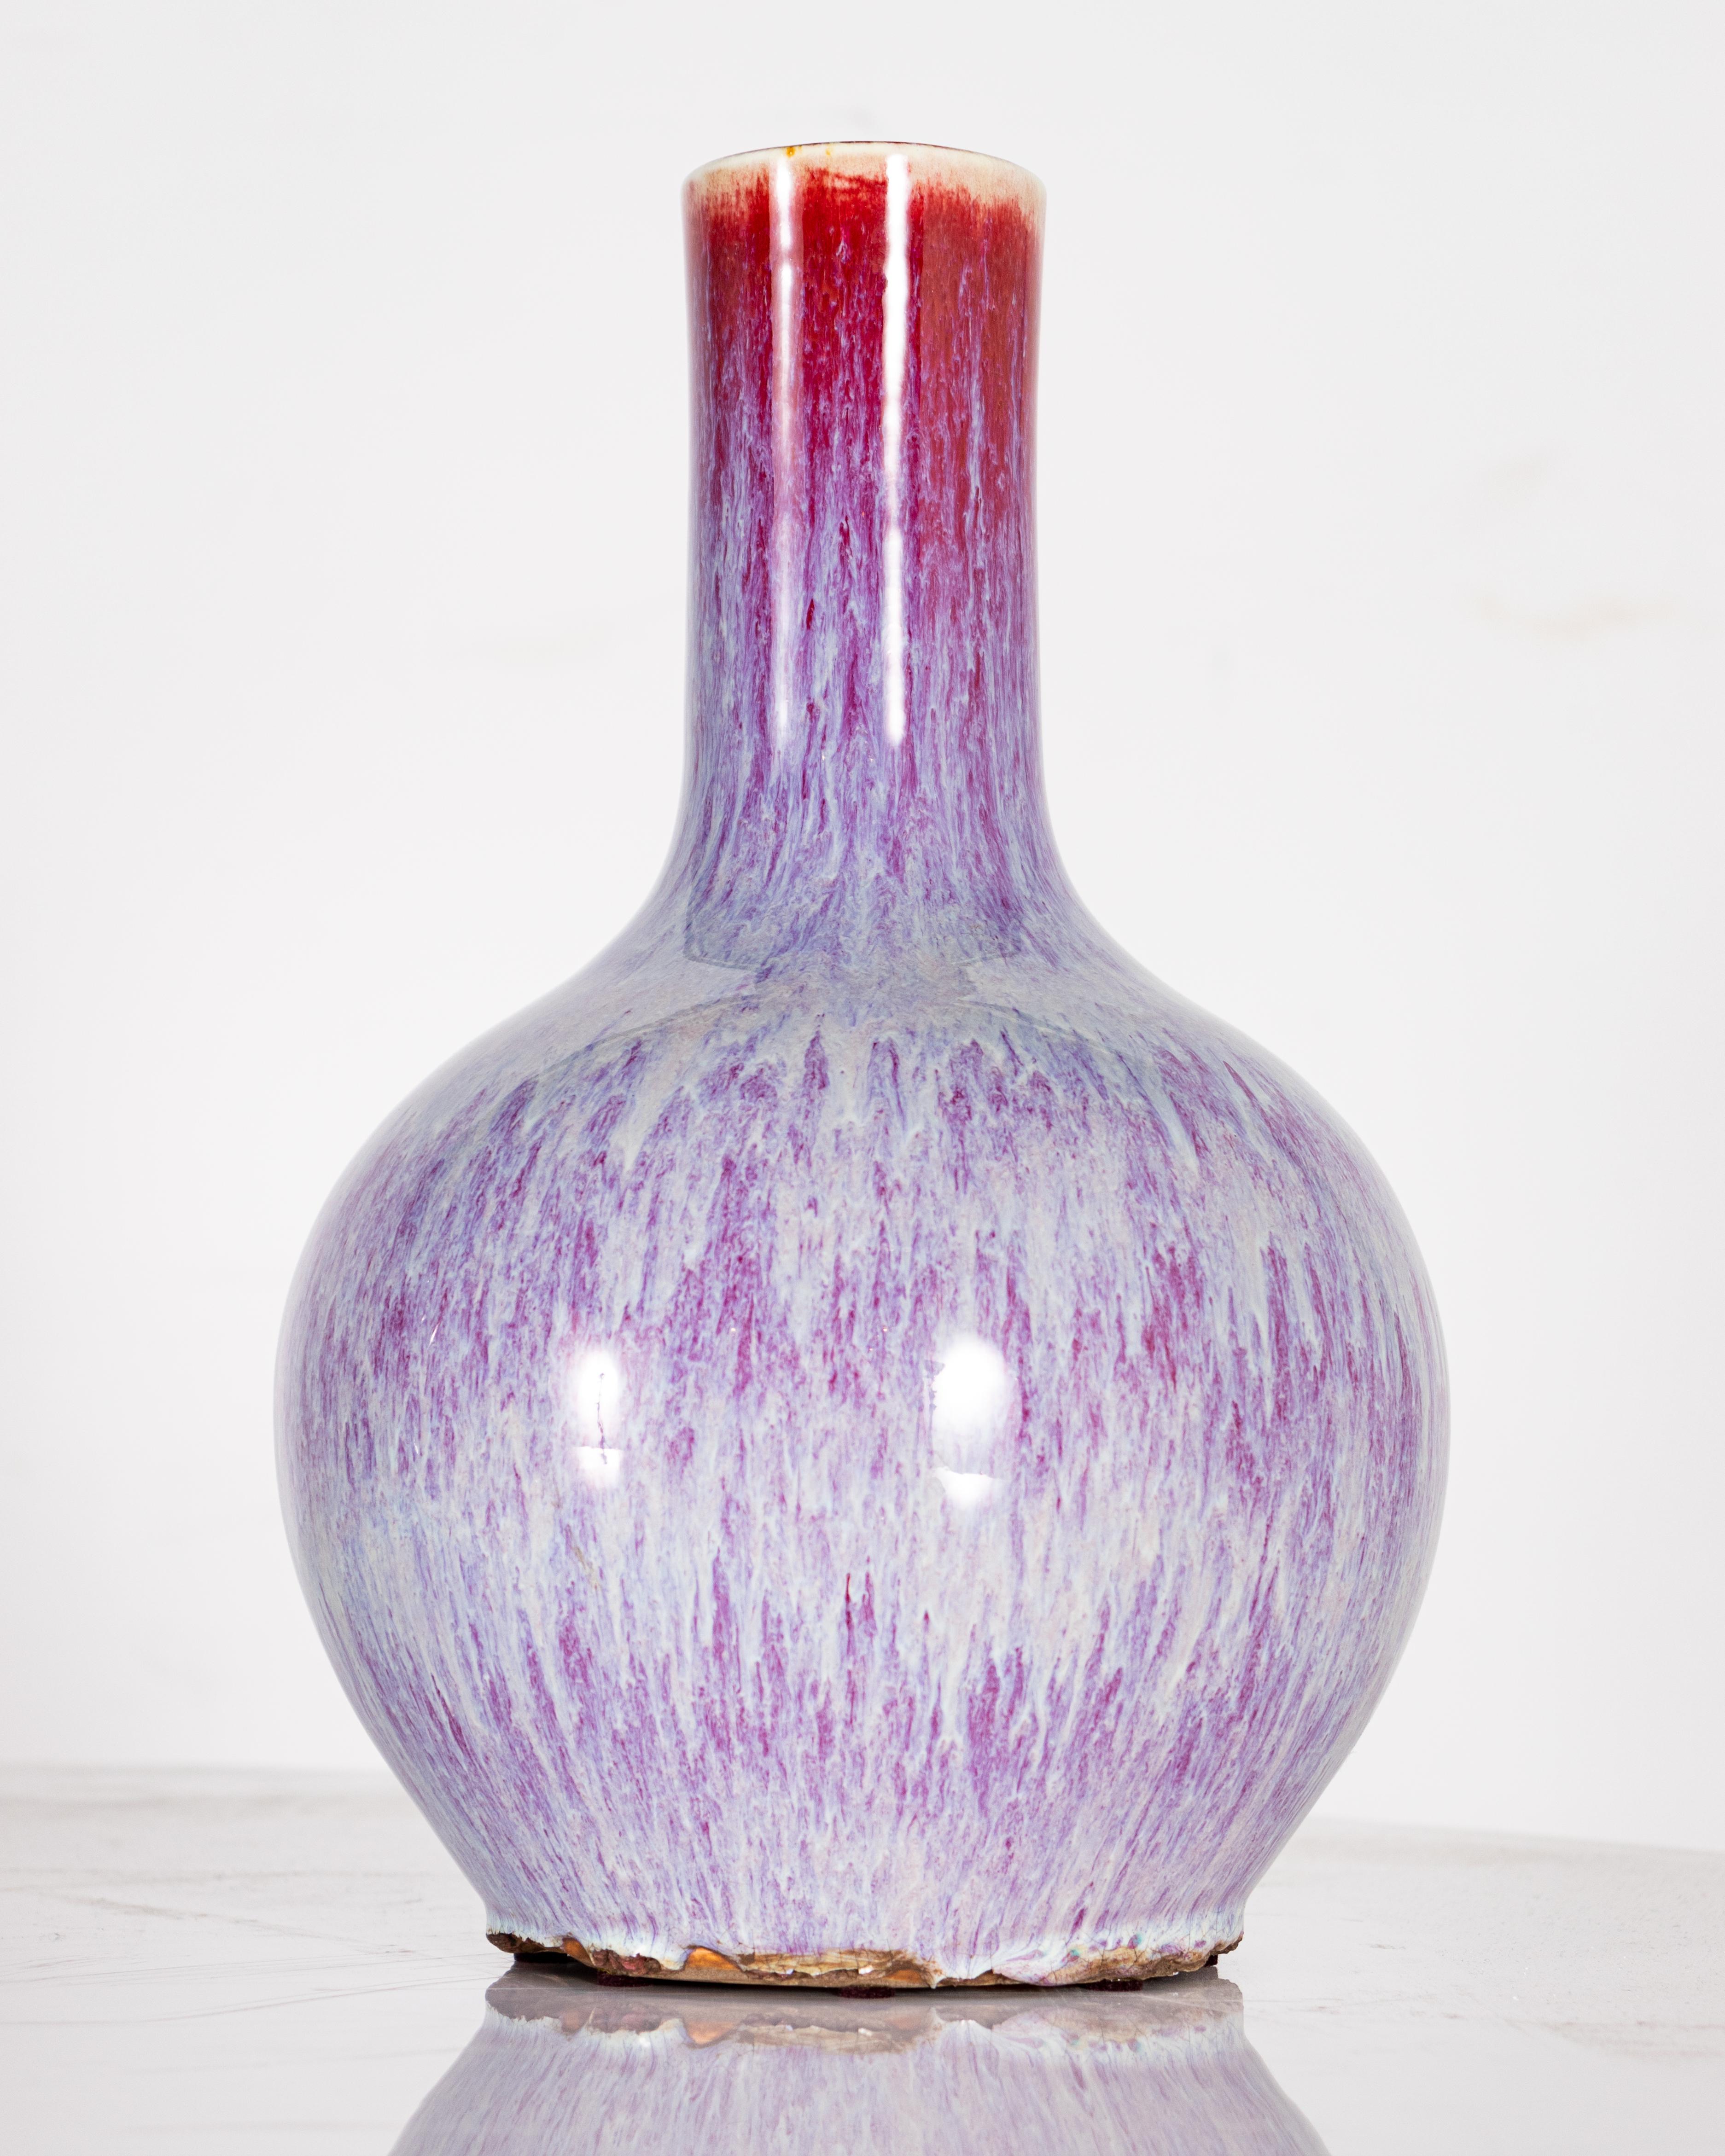 Variegated oxblood glaze ceramic Chinese vase. In my organic, contemporary, vintage and mid-century modern style.

This piece is a part of Brendan Bass’s one-of-a-kind collection, Le Monde. French for “The World”, the Le Monde collection is made up